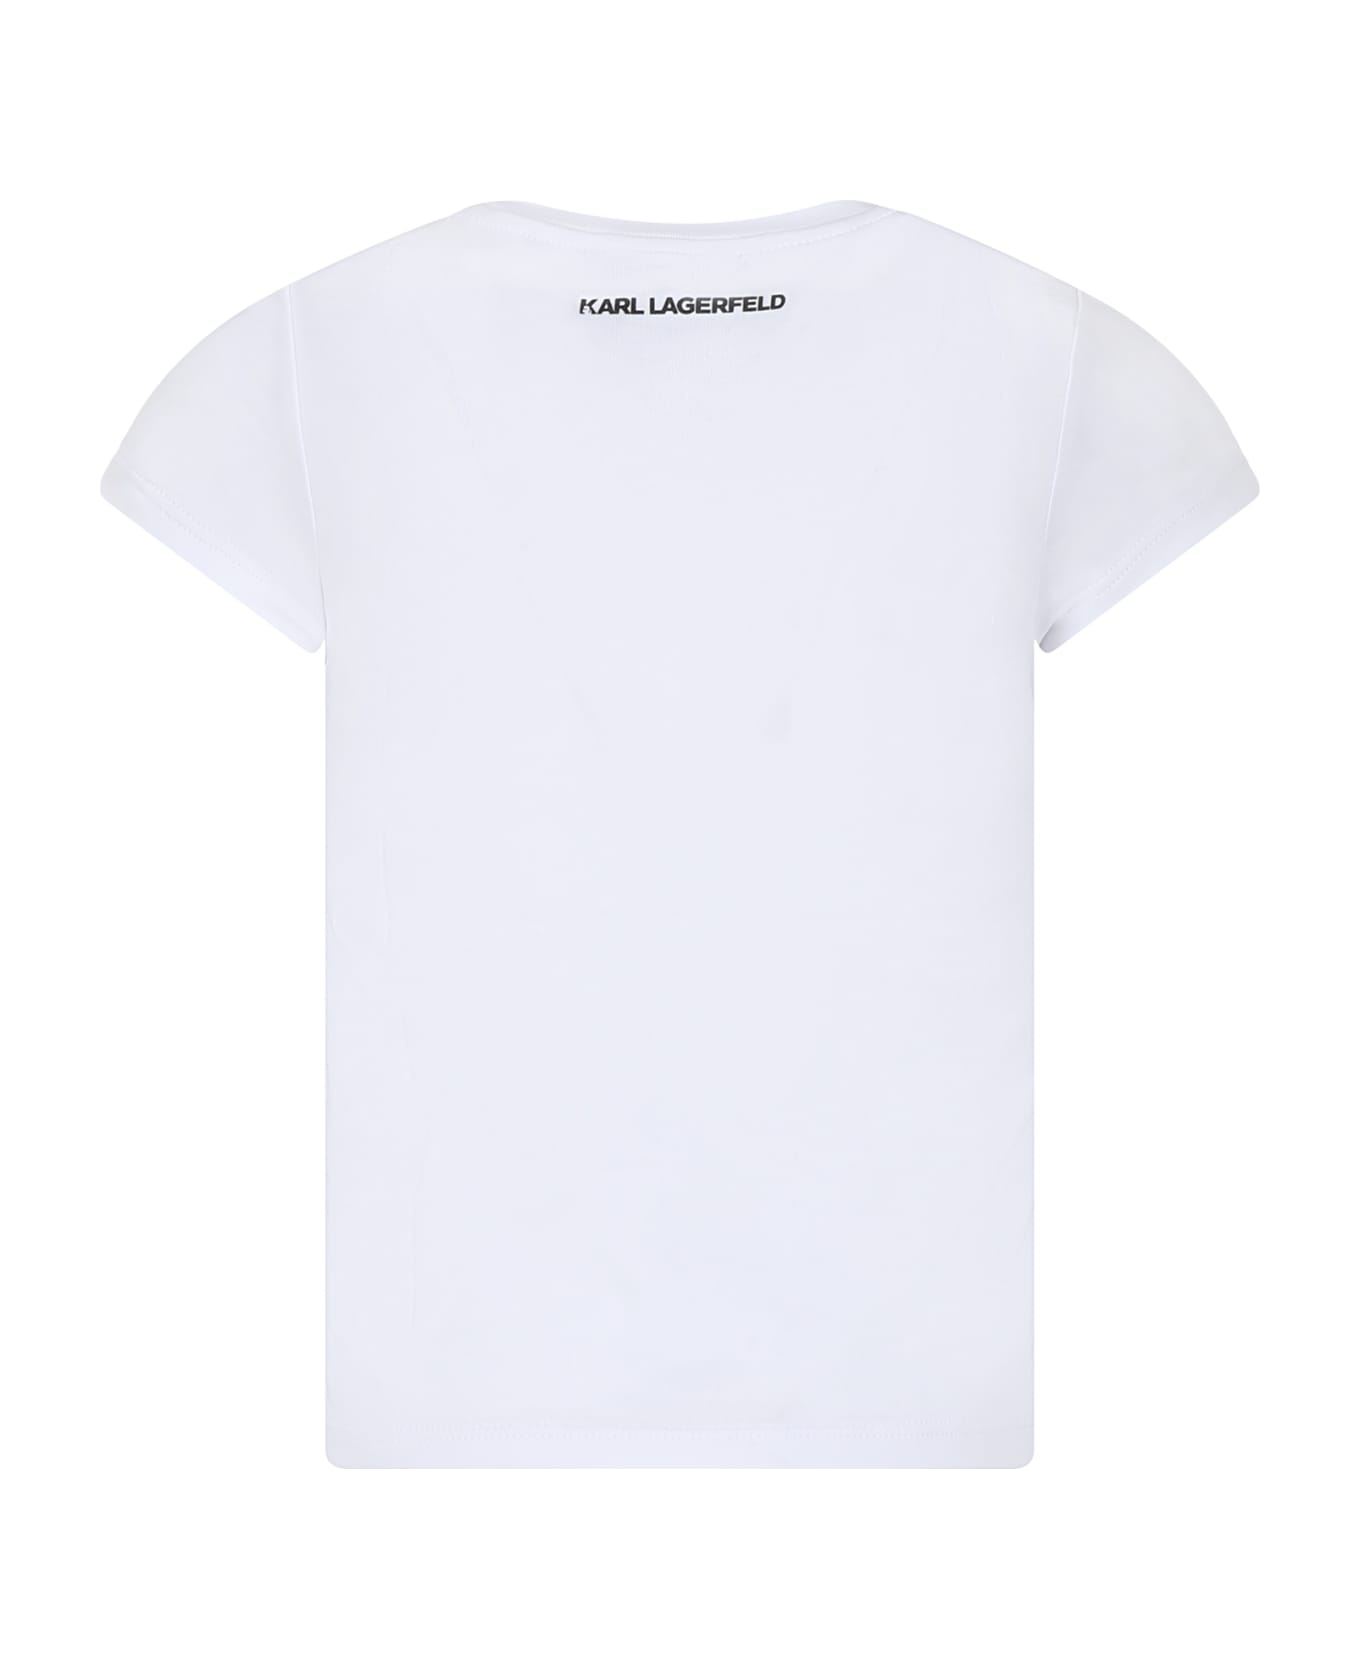 Karl Lagerfeld Kids White T-shirt For Girl With Karl Lagerfeld Print And Logo - White Tシャツ＆ポロシャツ